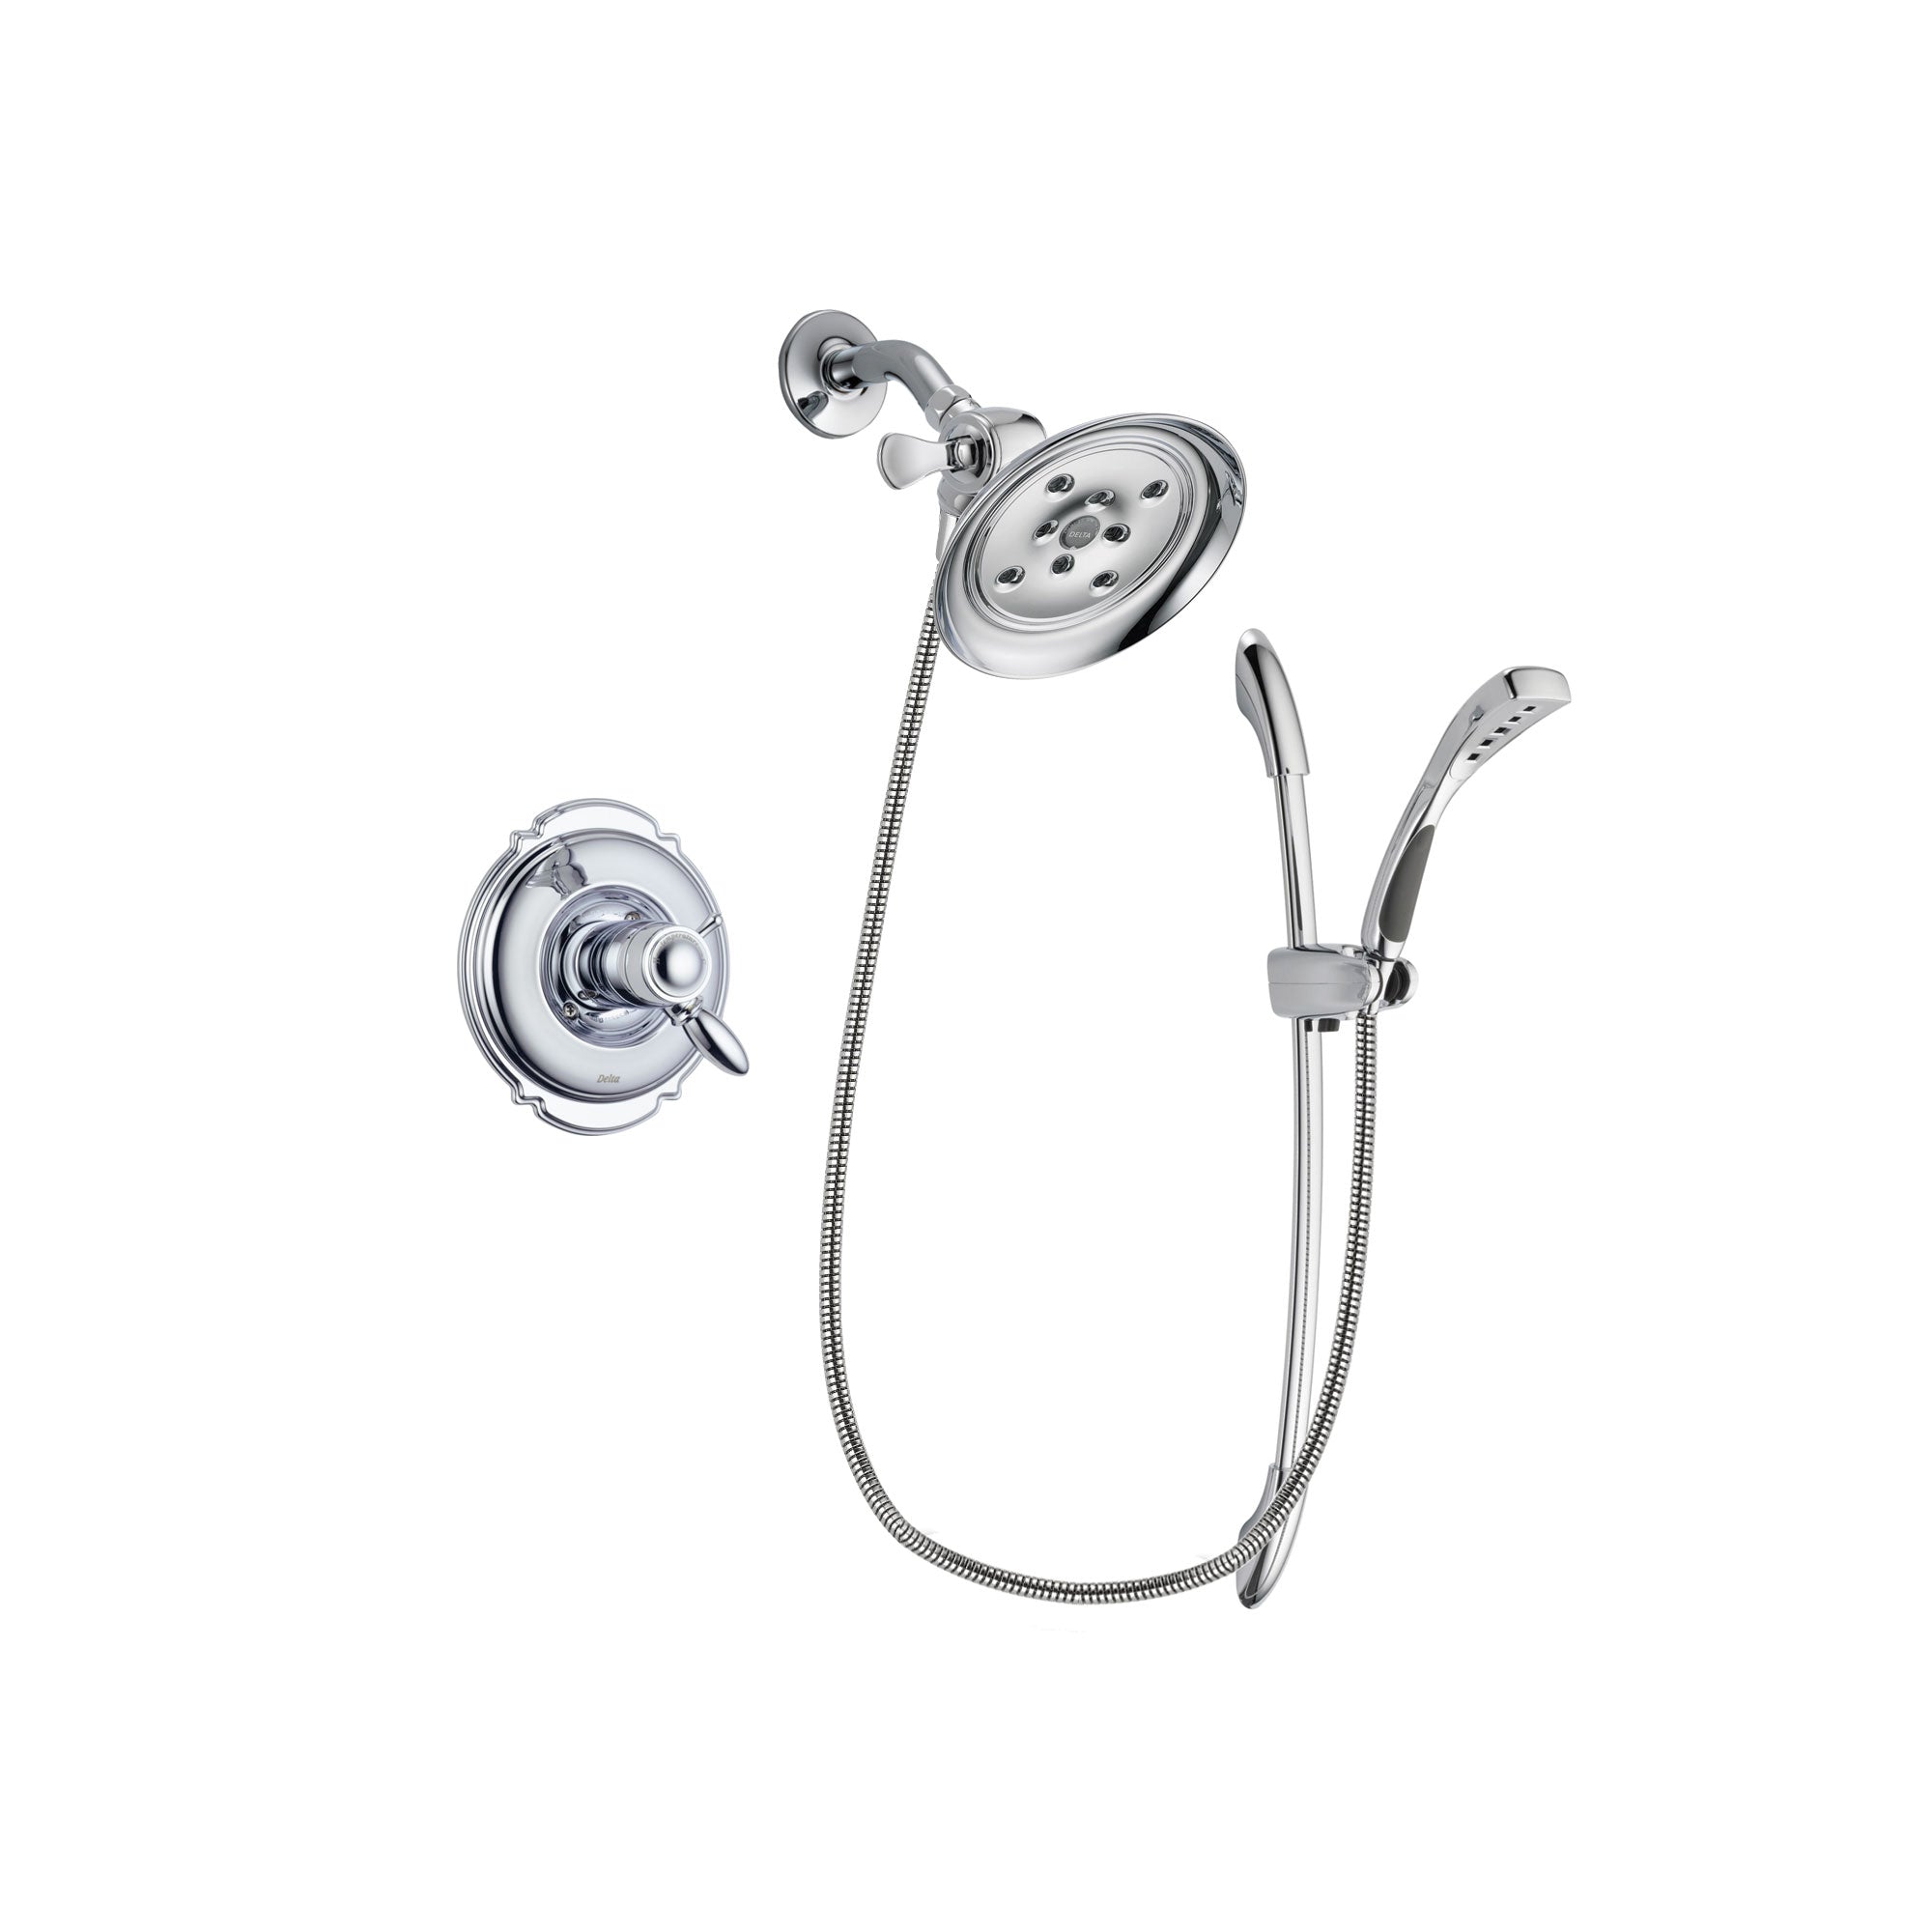 Delta Victorian Chrome Finish Thermostatic Shower Faucet System Package with Large Rain Showerhead and Handheld Shower with Slide Bar Includes Rough-in Valve DSP0496V